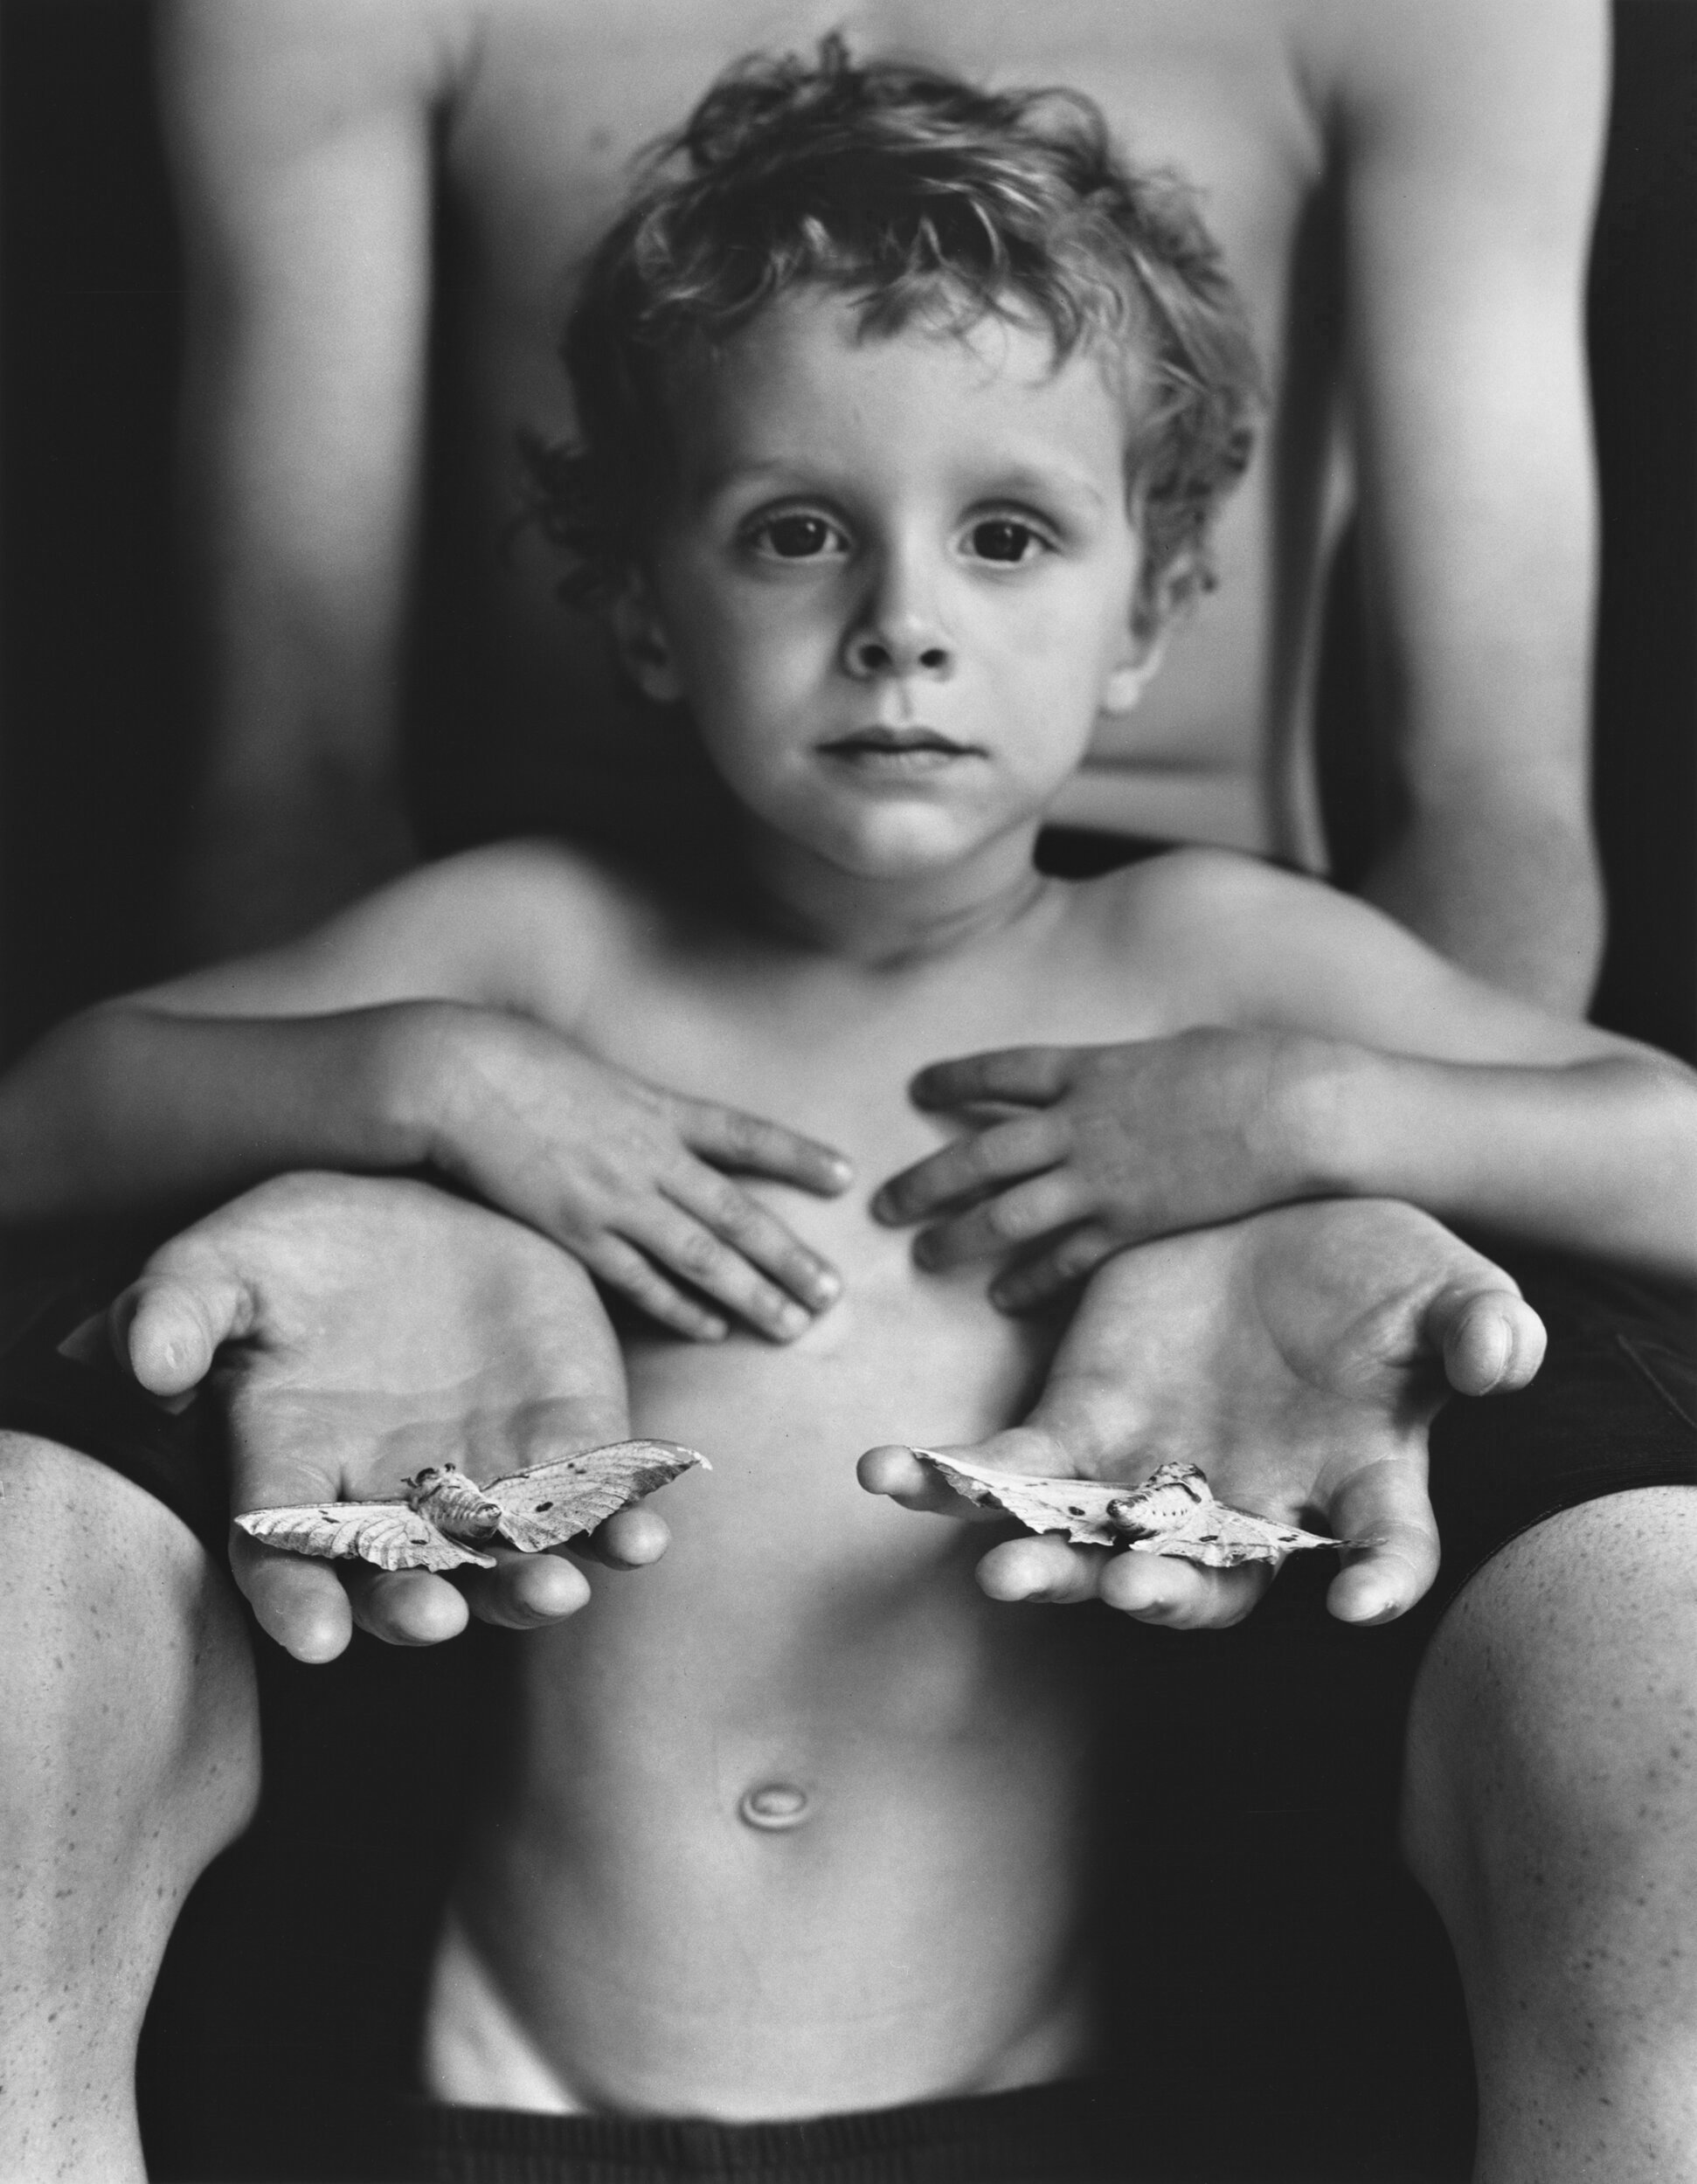  GEORGE WITH MOTHS, 2003  GELATIN SILVER PHOTOGRAPH 